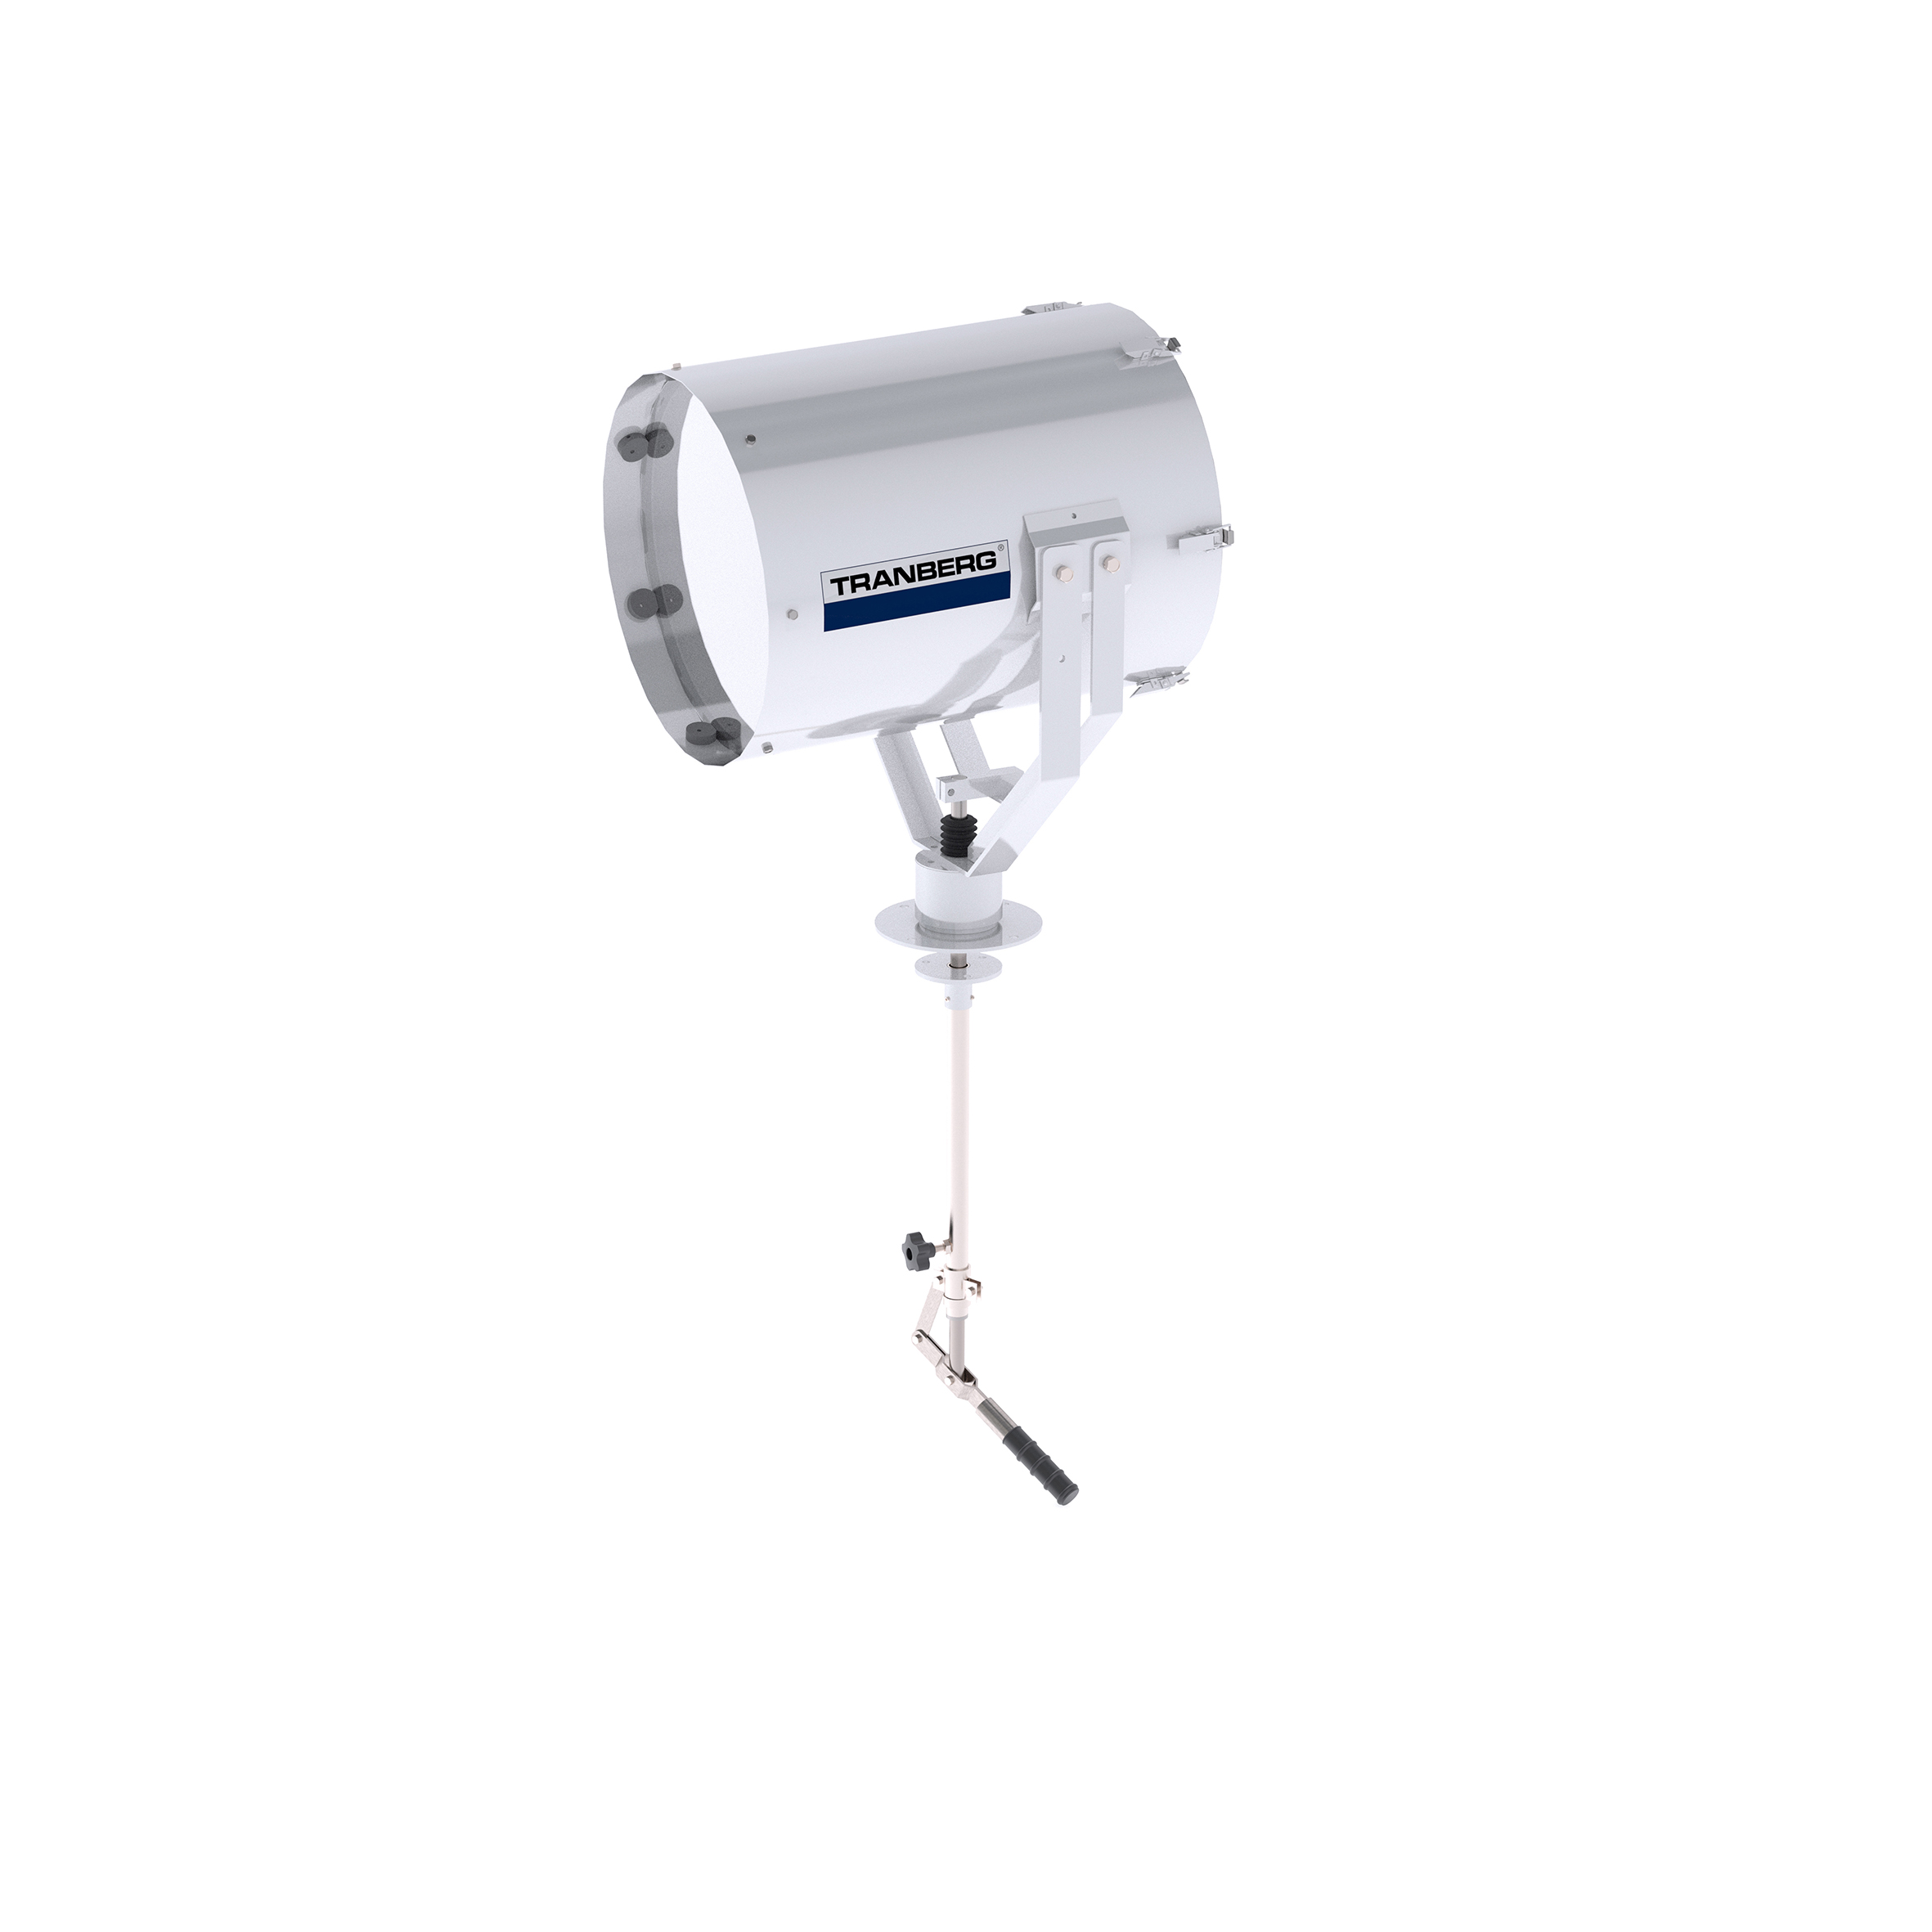 TEF 2630 Searchlight: Halogen 1000W bulb incl, 120V, Bridge Controlled, Stainless Steel photo